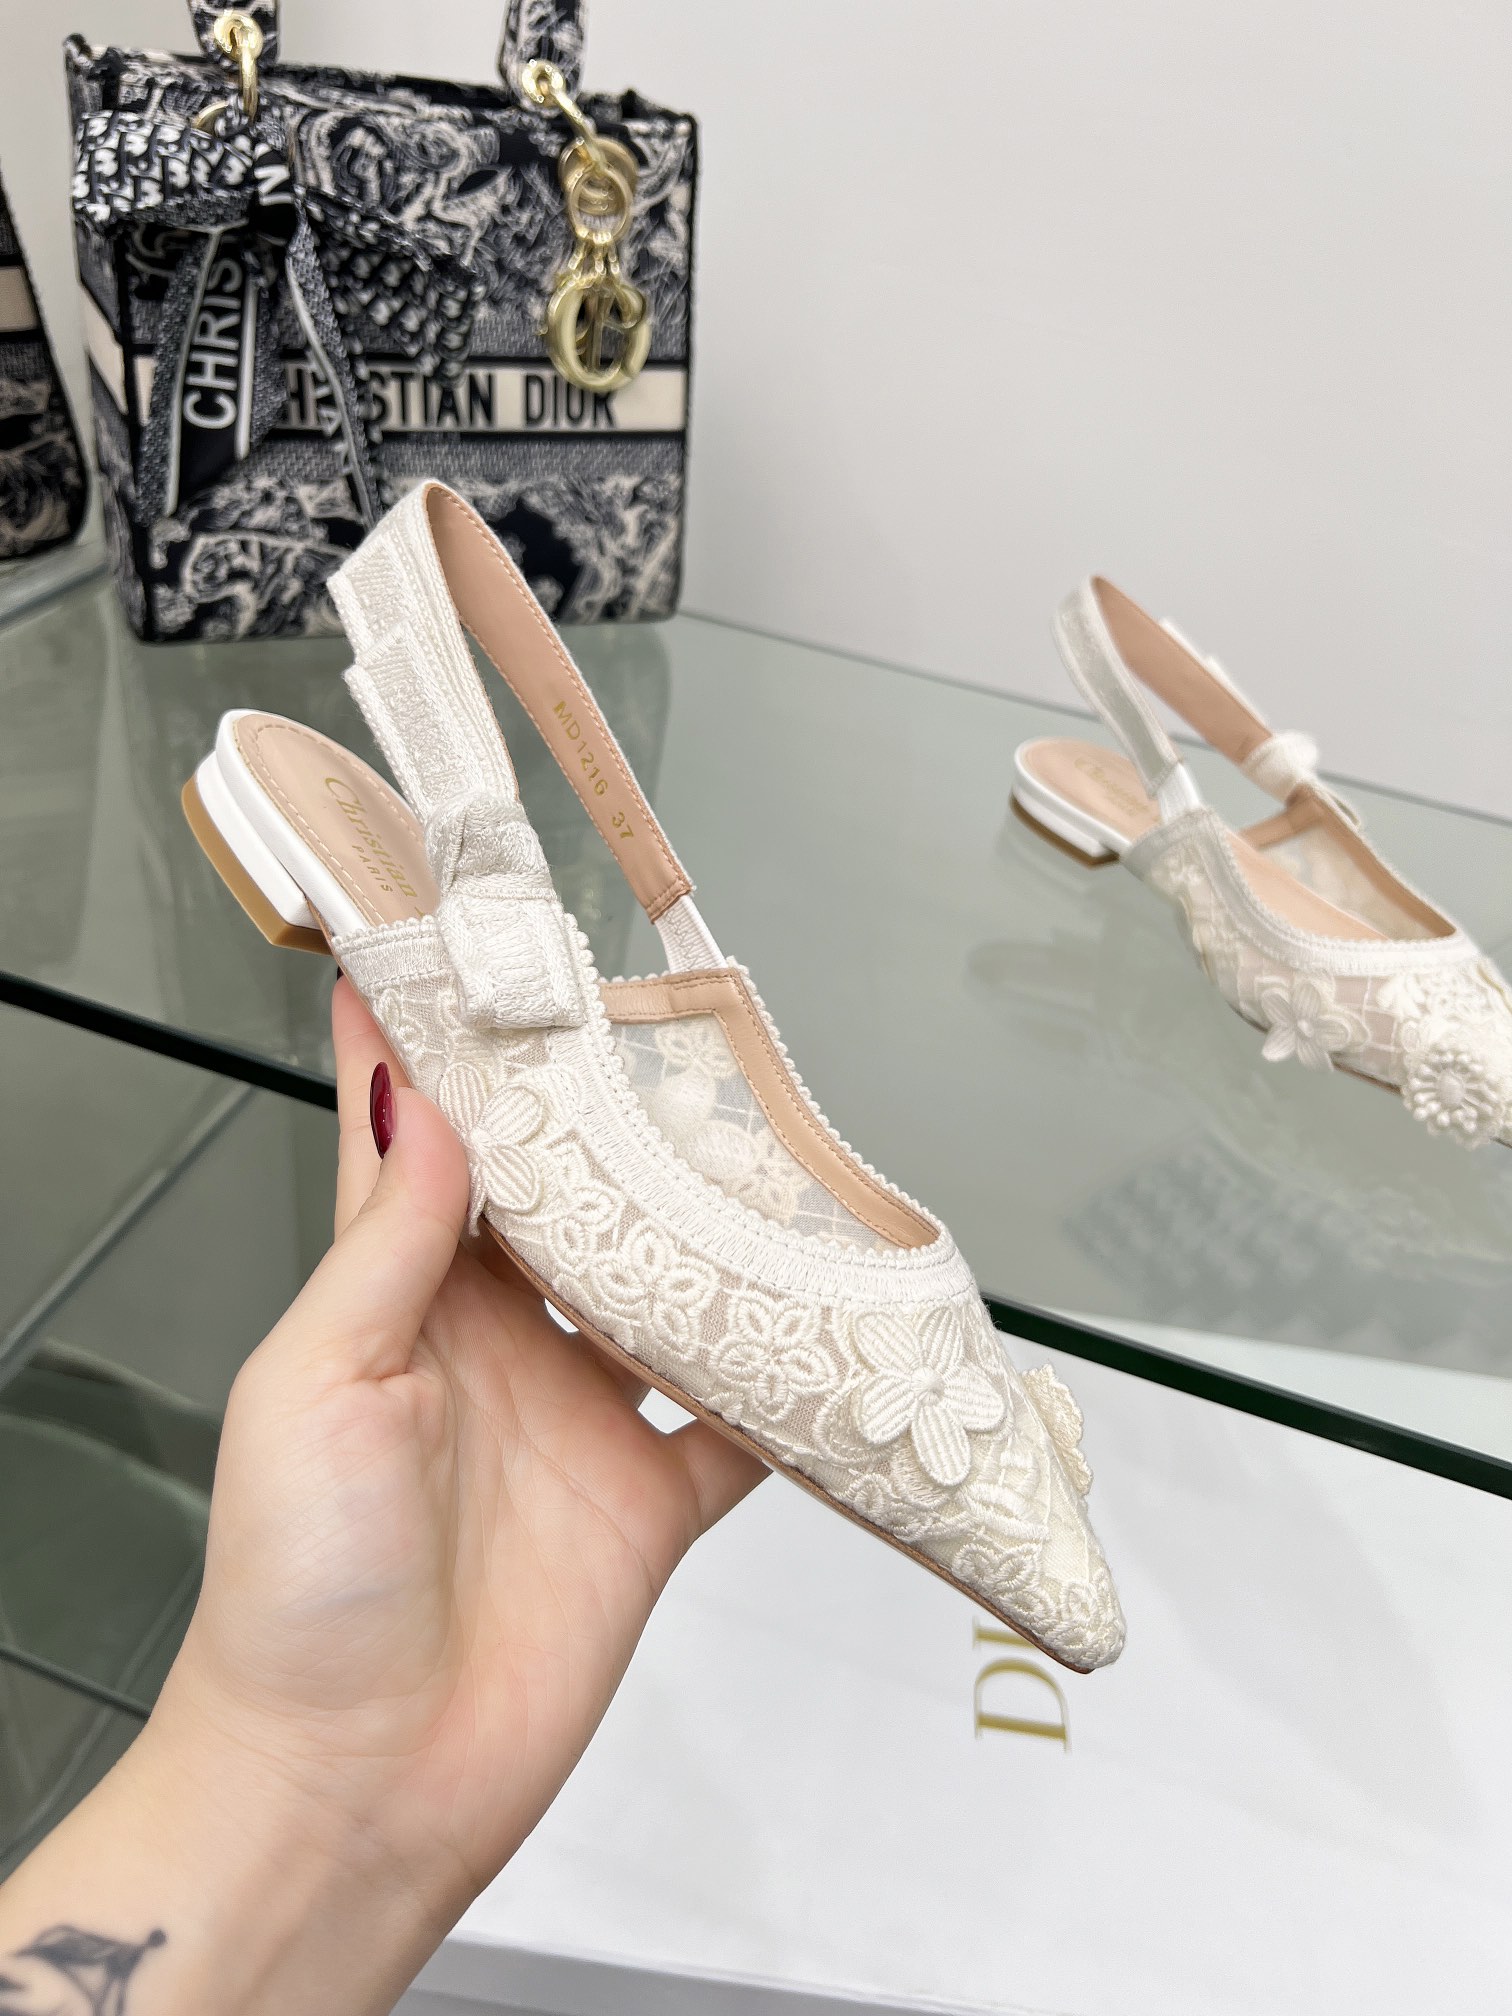 Dior Shoes High Heel Pumps Embroidery Genuine Leather Sheepskin Spring/Summer Collection